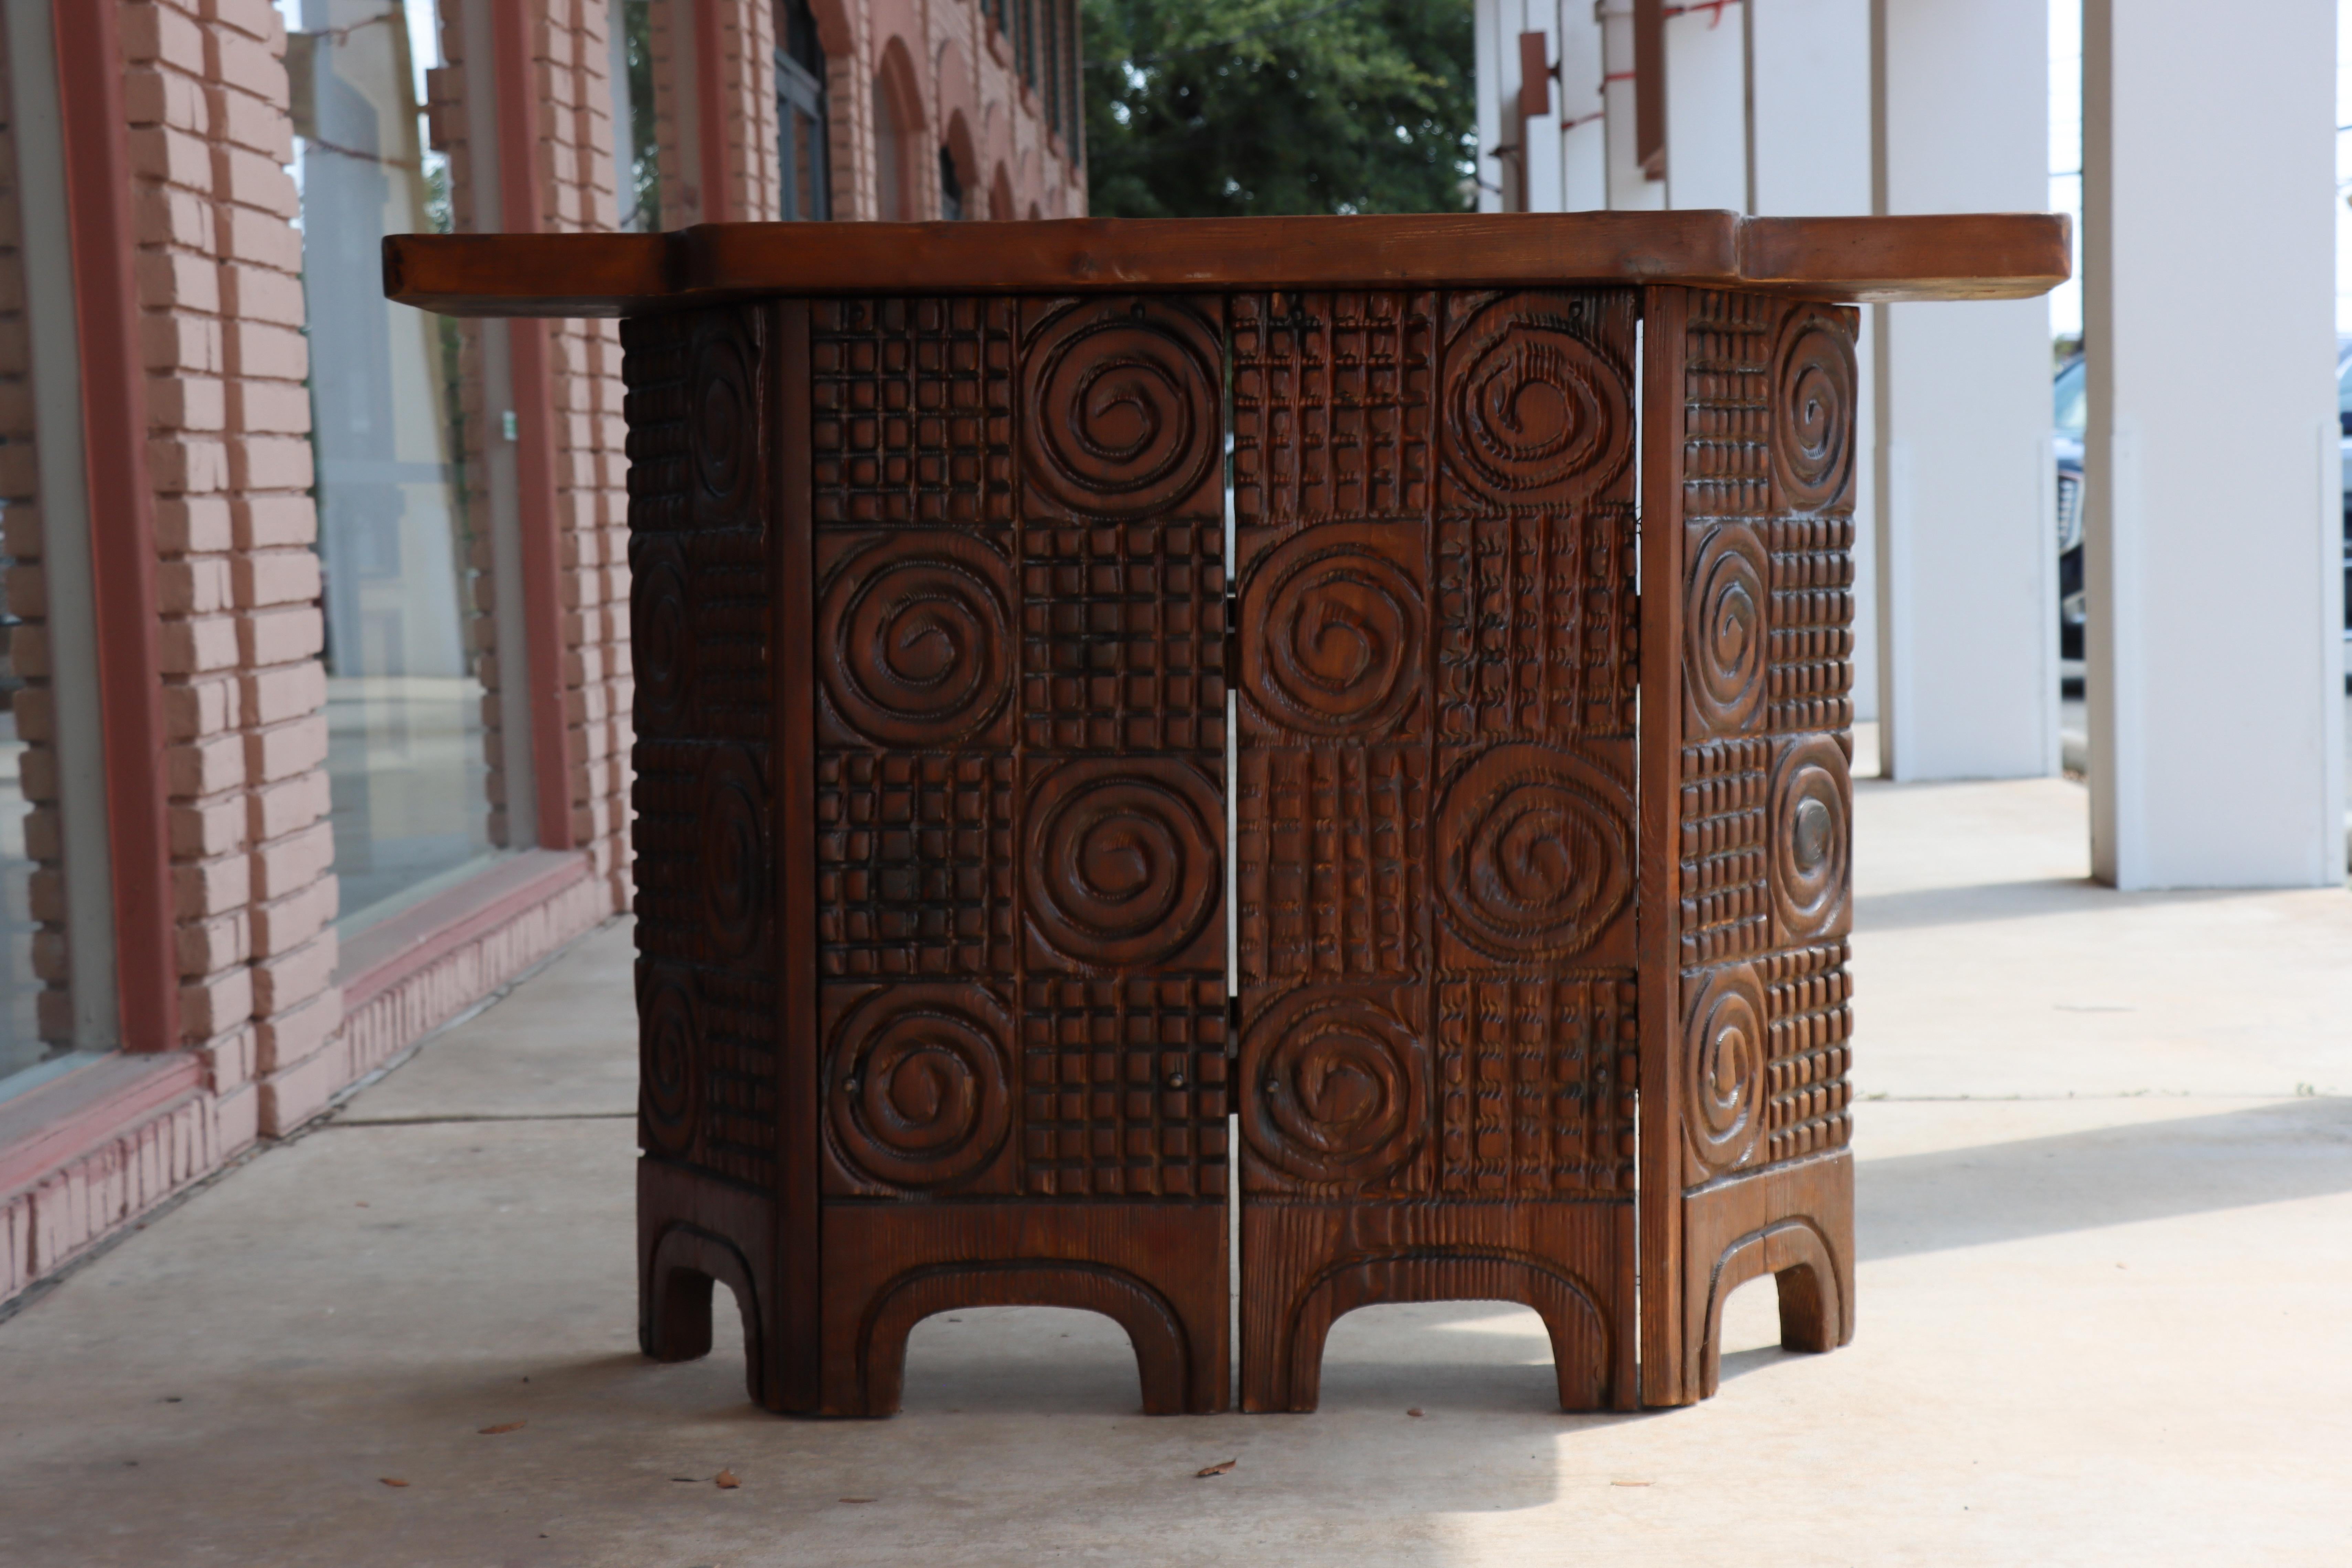 A standing “chateau” bar designed by William Westenhaver and Crafted by the West Indian Trading Company (Witco), 1959.

 This example is made from sturdy, dark-stained cedar and features two spacious shelves thoughtfully designed to hold your